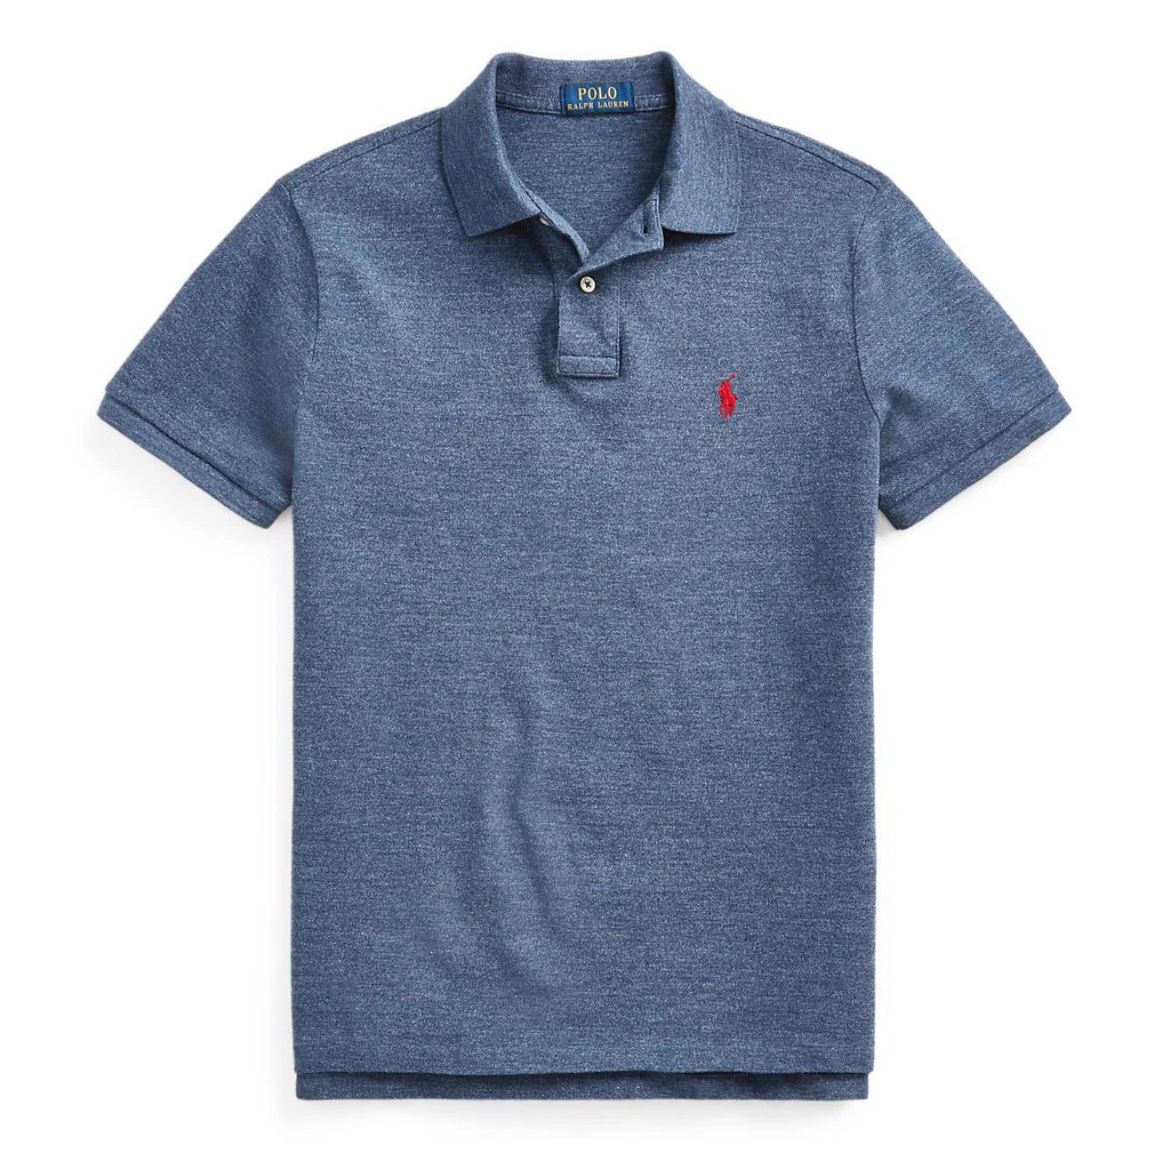 Polo Ralph Lauren Blue Short Sleeve Shirt. Classic Fit Small Red Pony